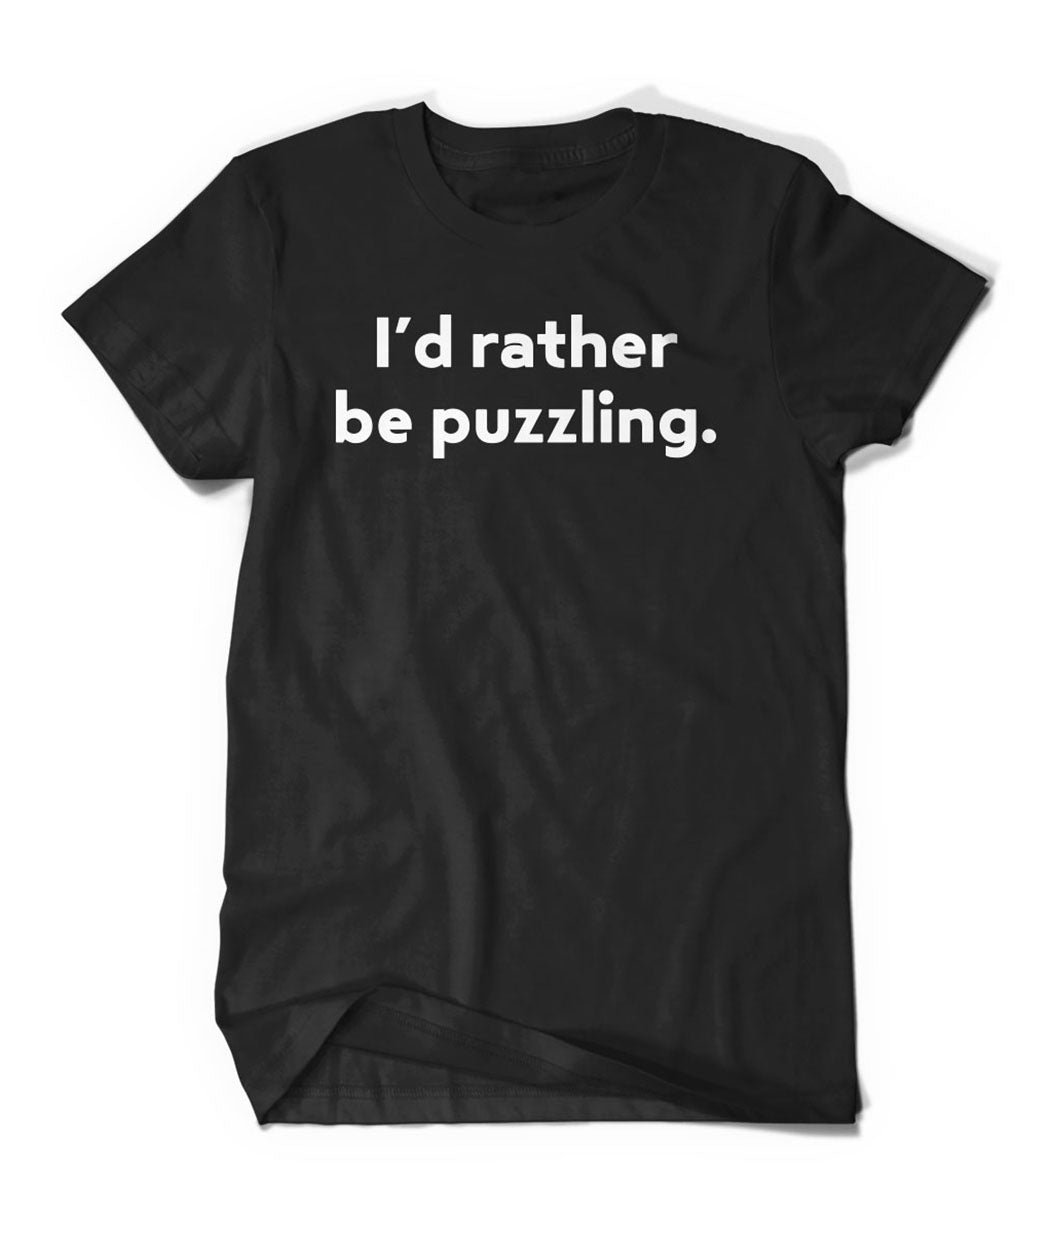 A black t-shirt that says "I'd rather be puzzling." From Karen Puzzles. 